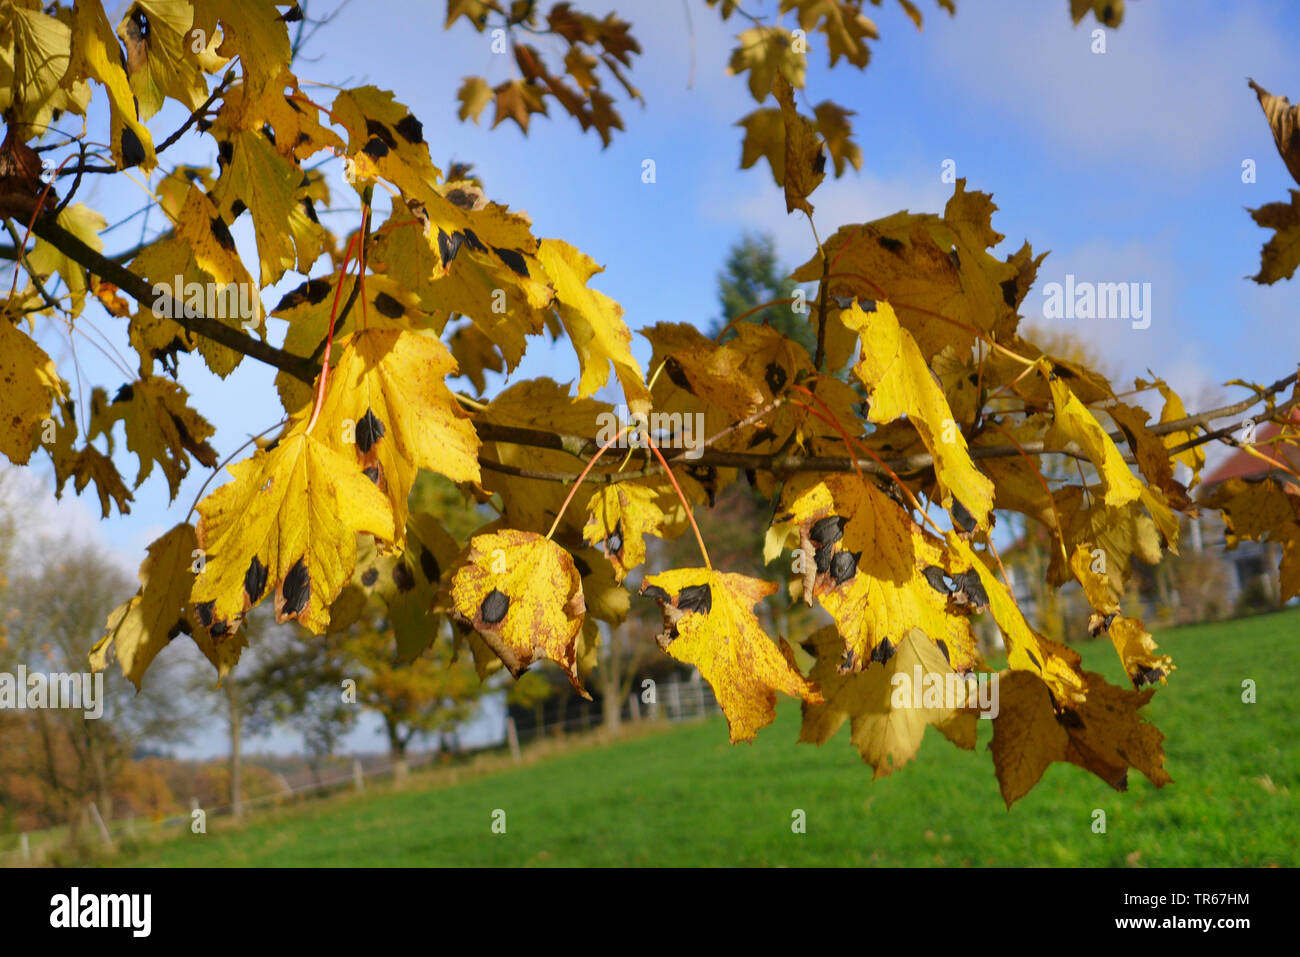 sycamore maple, great maple (Acer pseudoplatanus), autumn leaves with tar spot desease, Germany Stock Photo